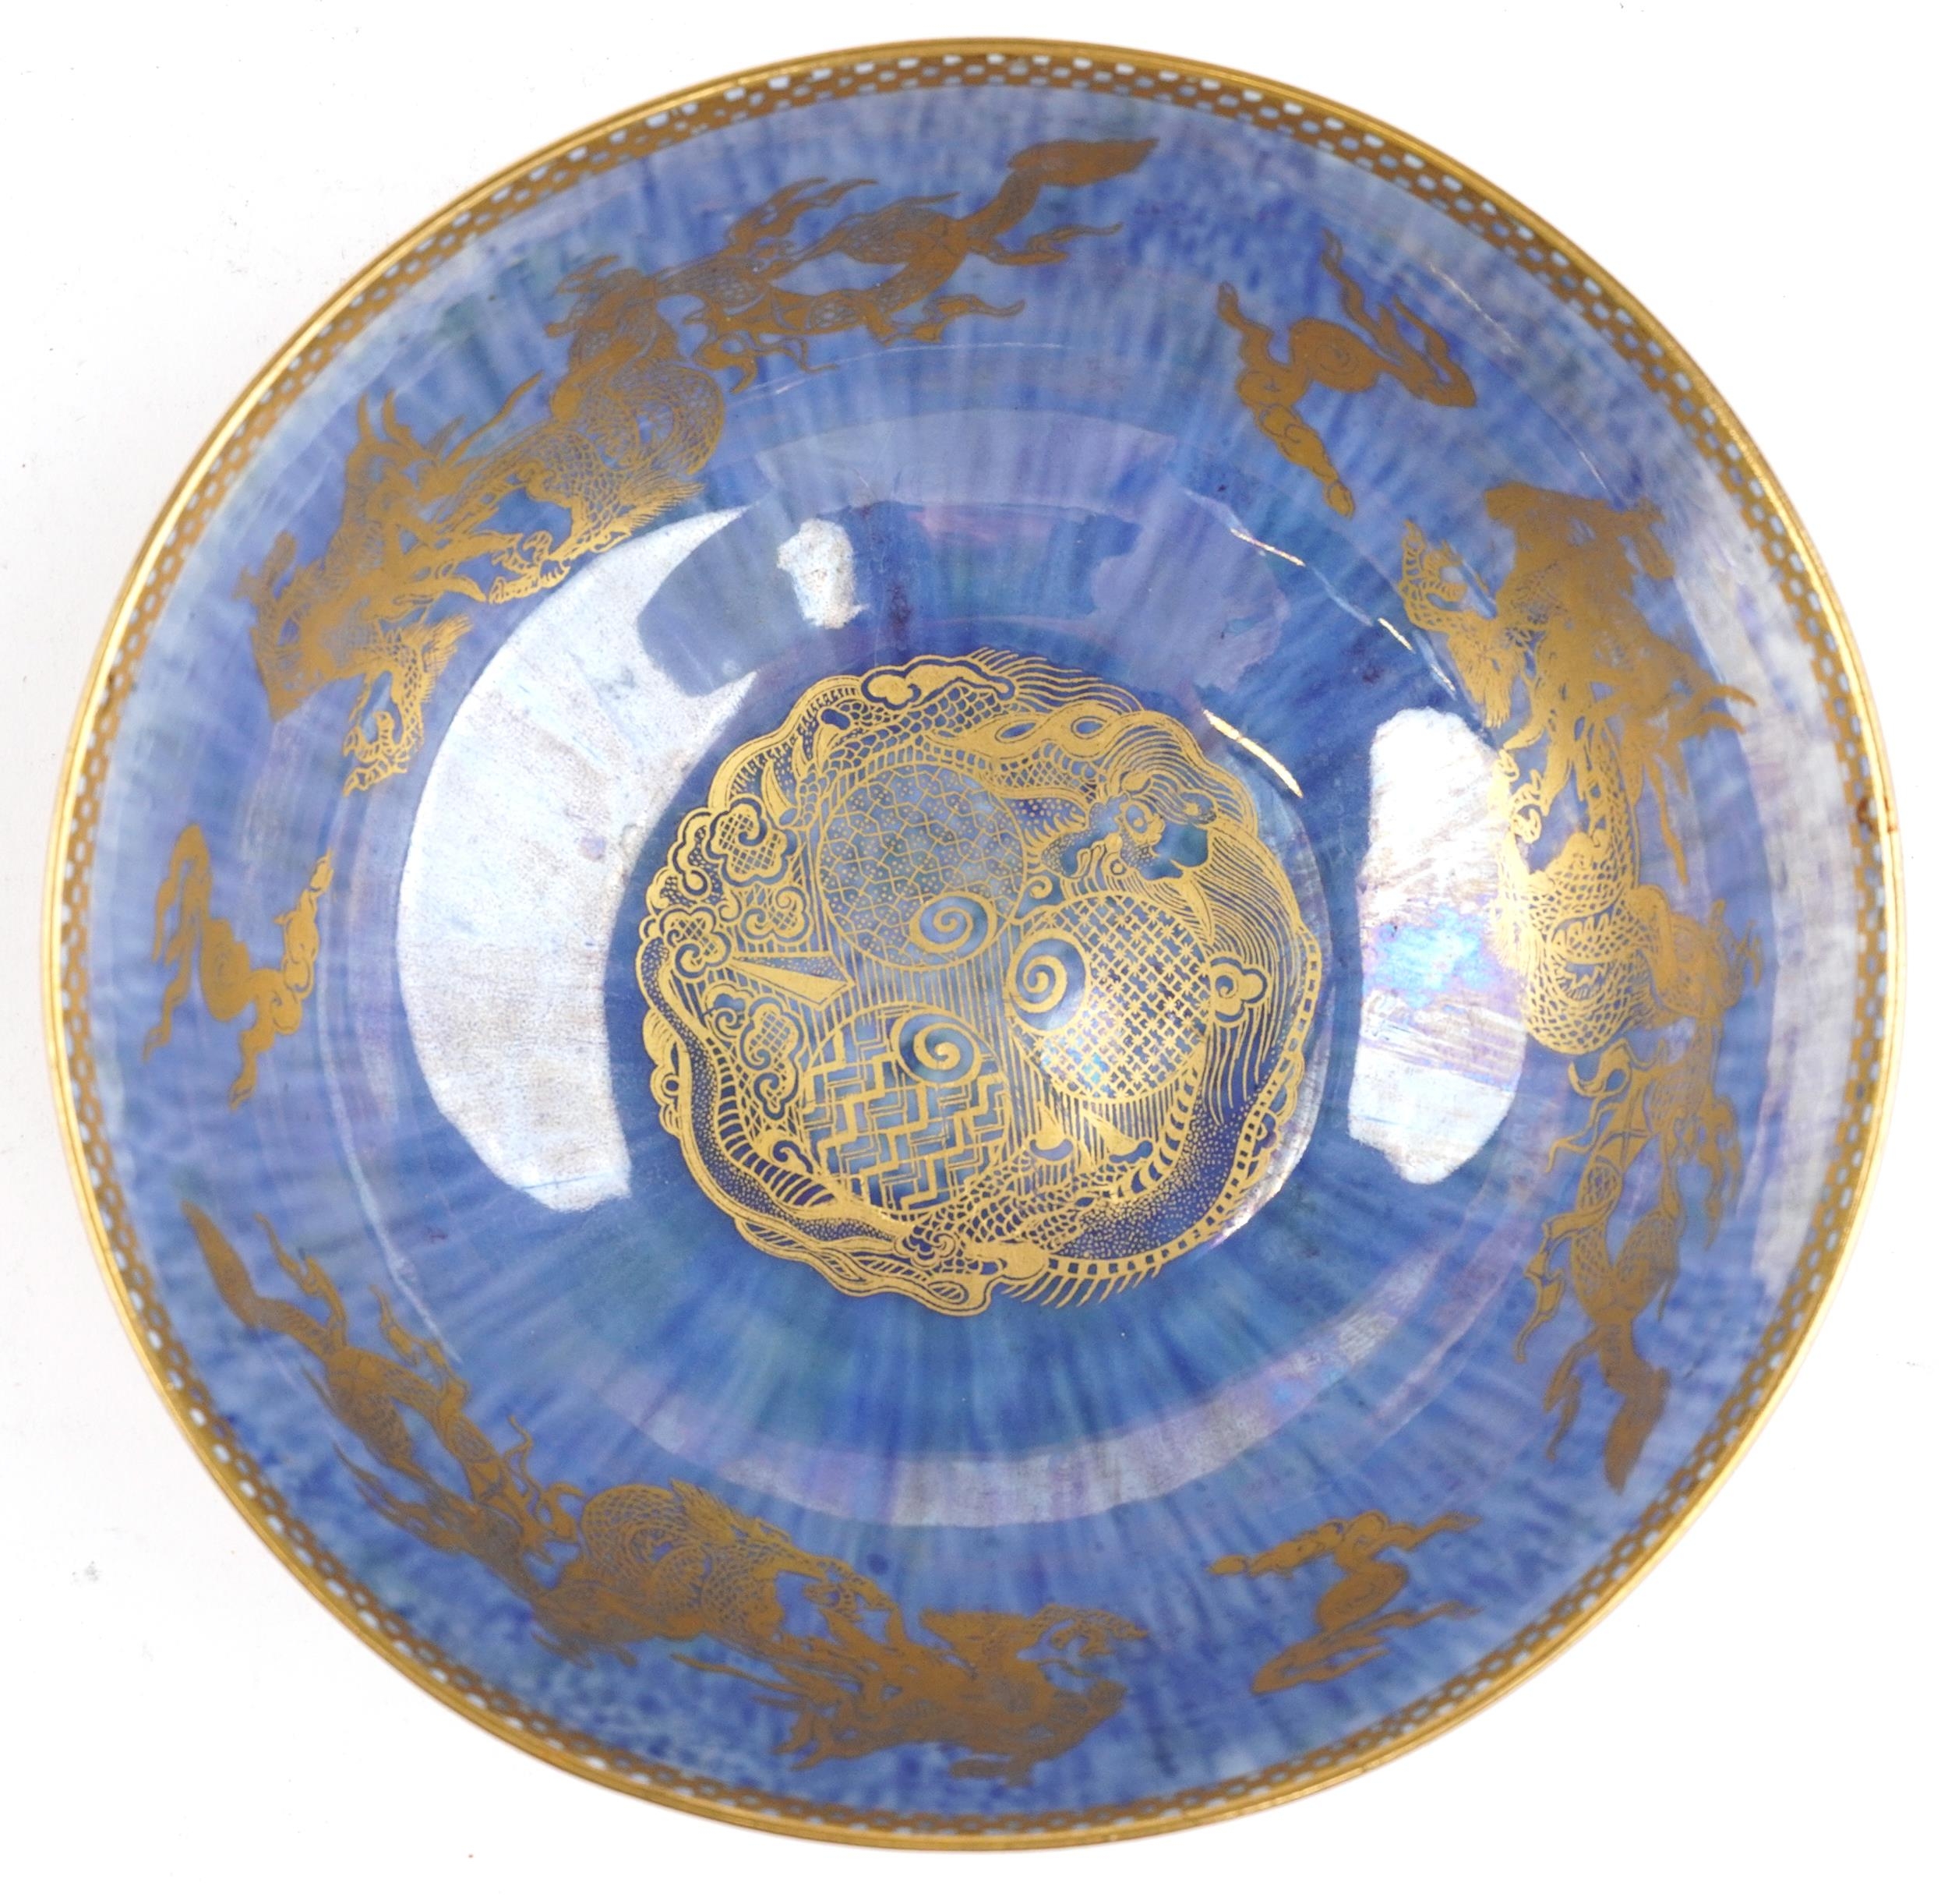 Wedgwood orange and blue ground Fairyland lustre bowl gilded with dragons chasing the flaming - Image 5 of 7